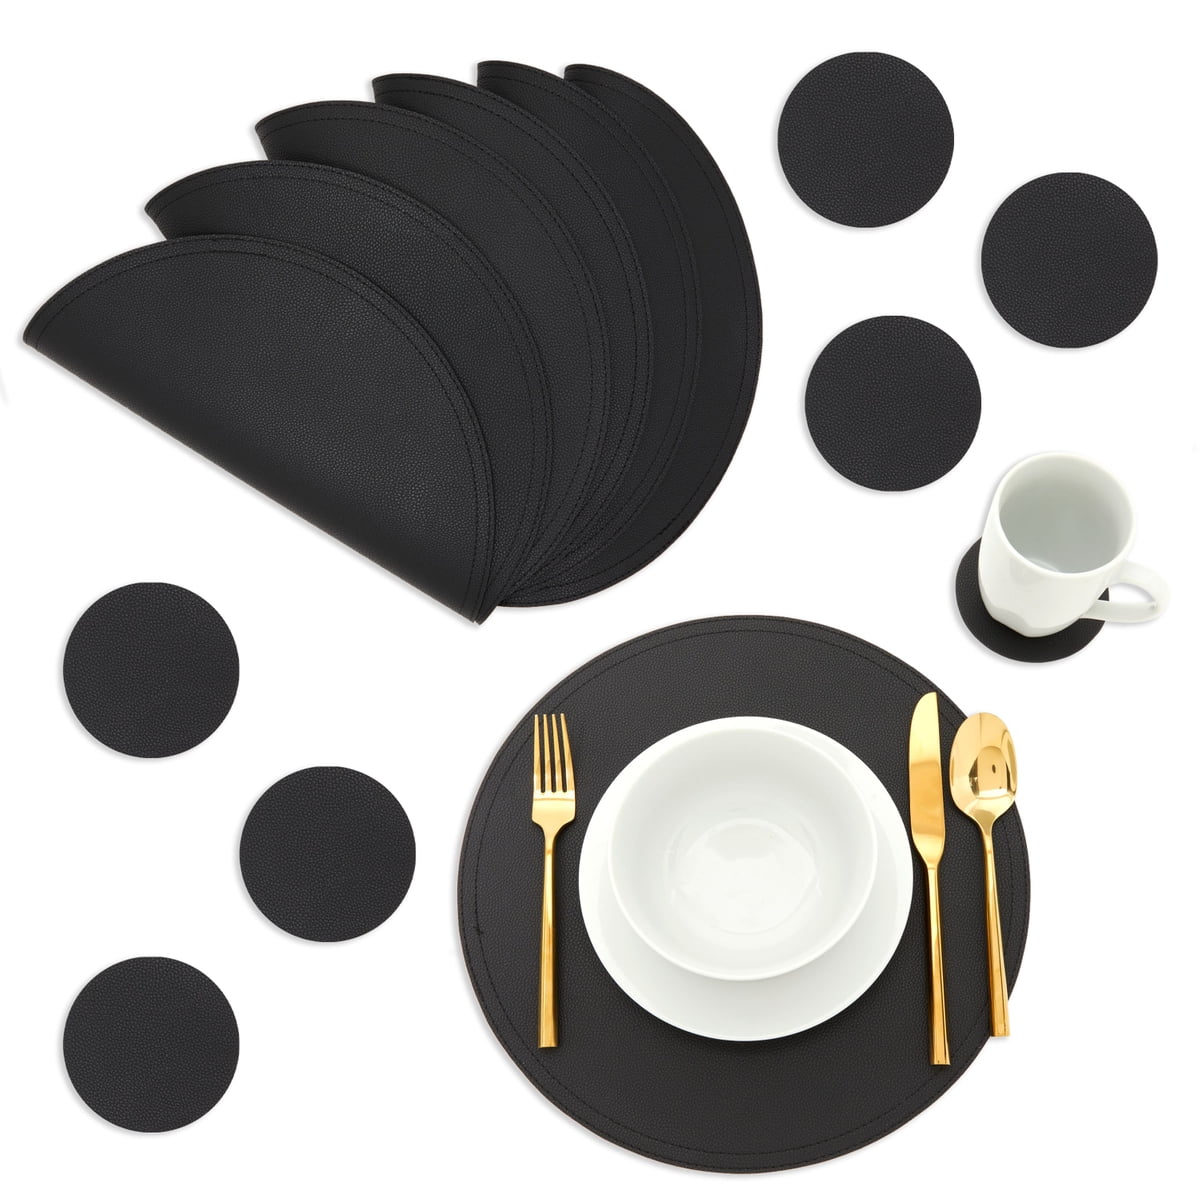 Heat Resistant Non-Slip Washable Waterproof Round Placemats for Parties BBQ Holidays Placemats and Coasters Set Space Planet Astronaut1 Leather Placemats Set for Dinner